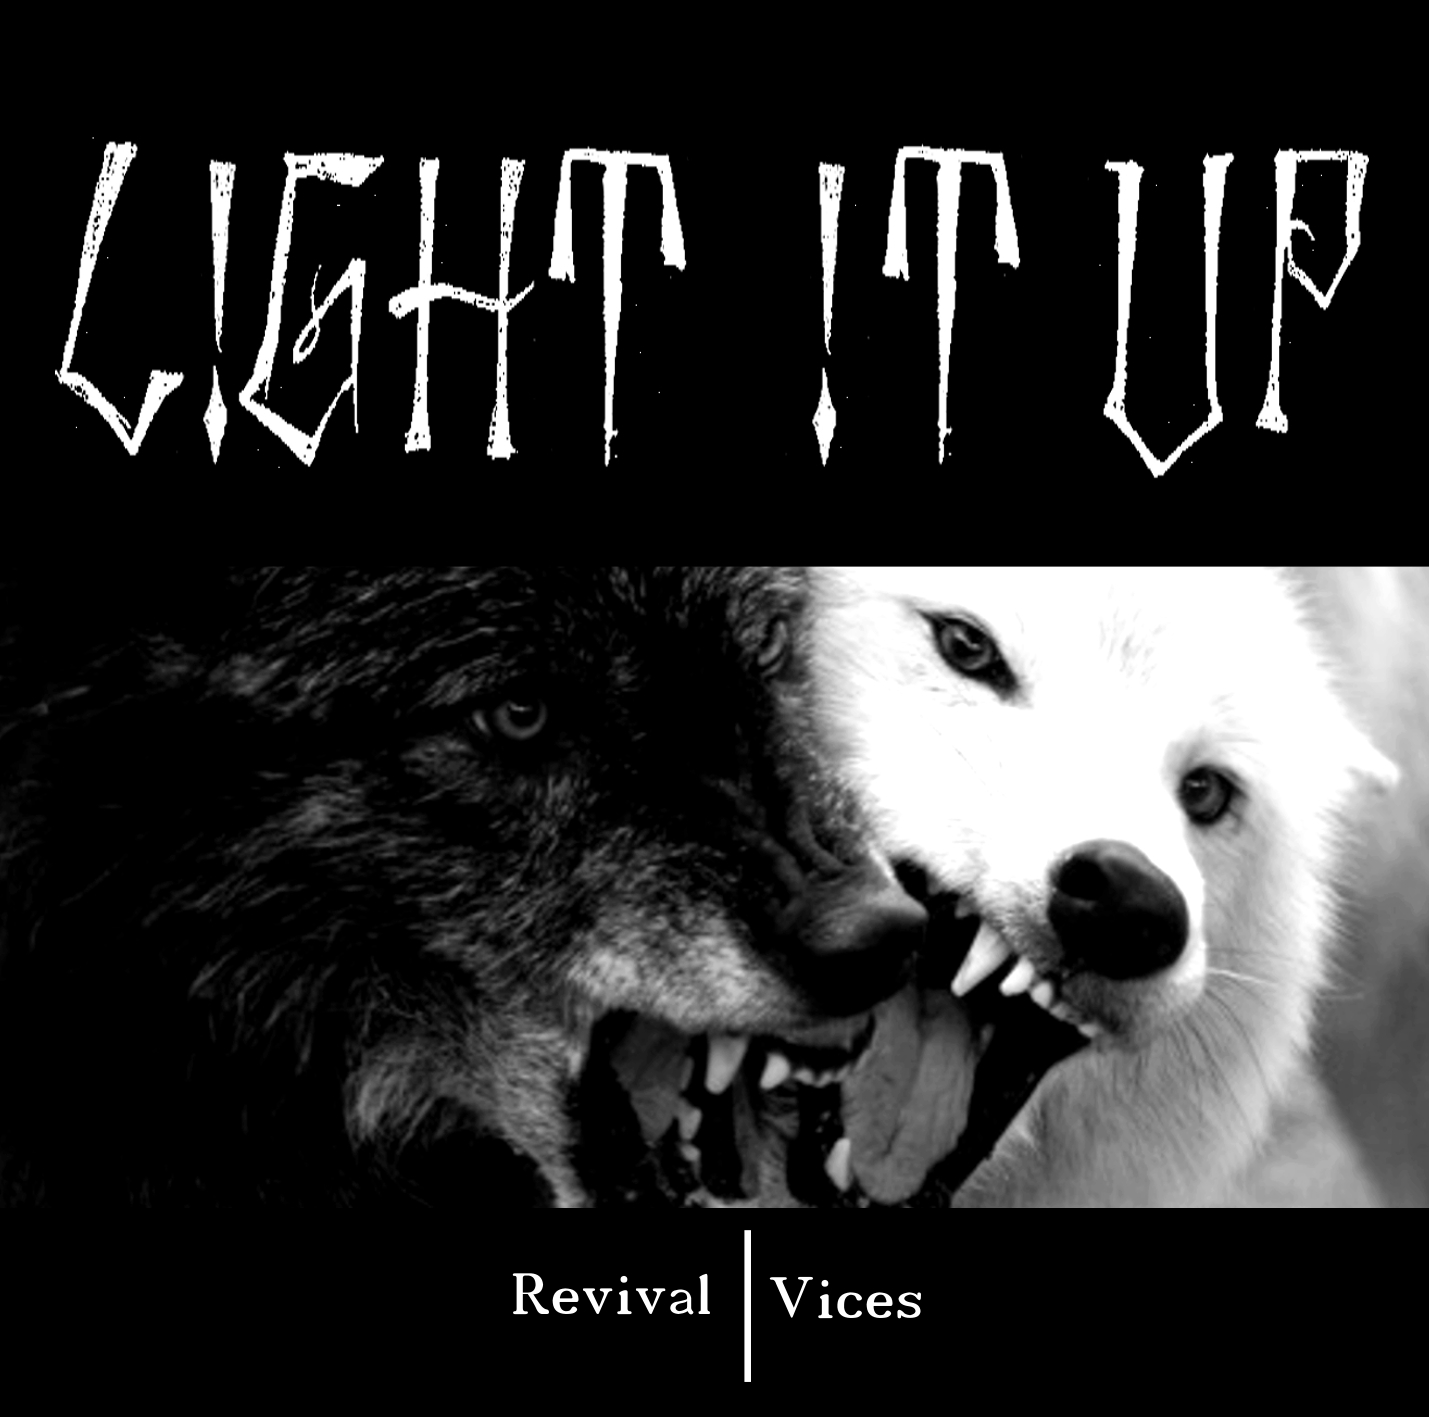 Light It Up released a new demo